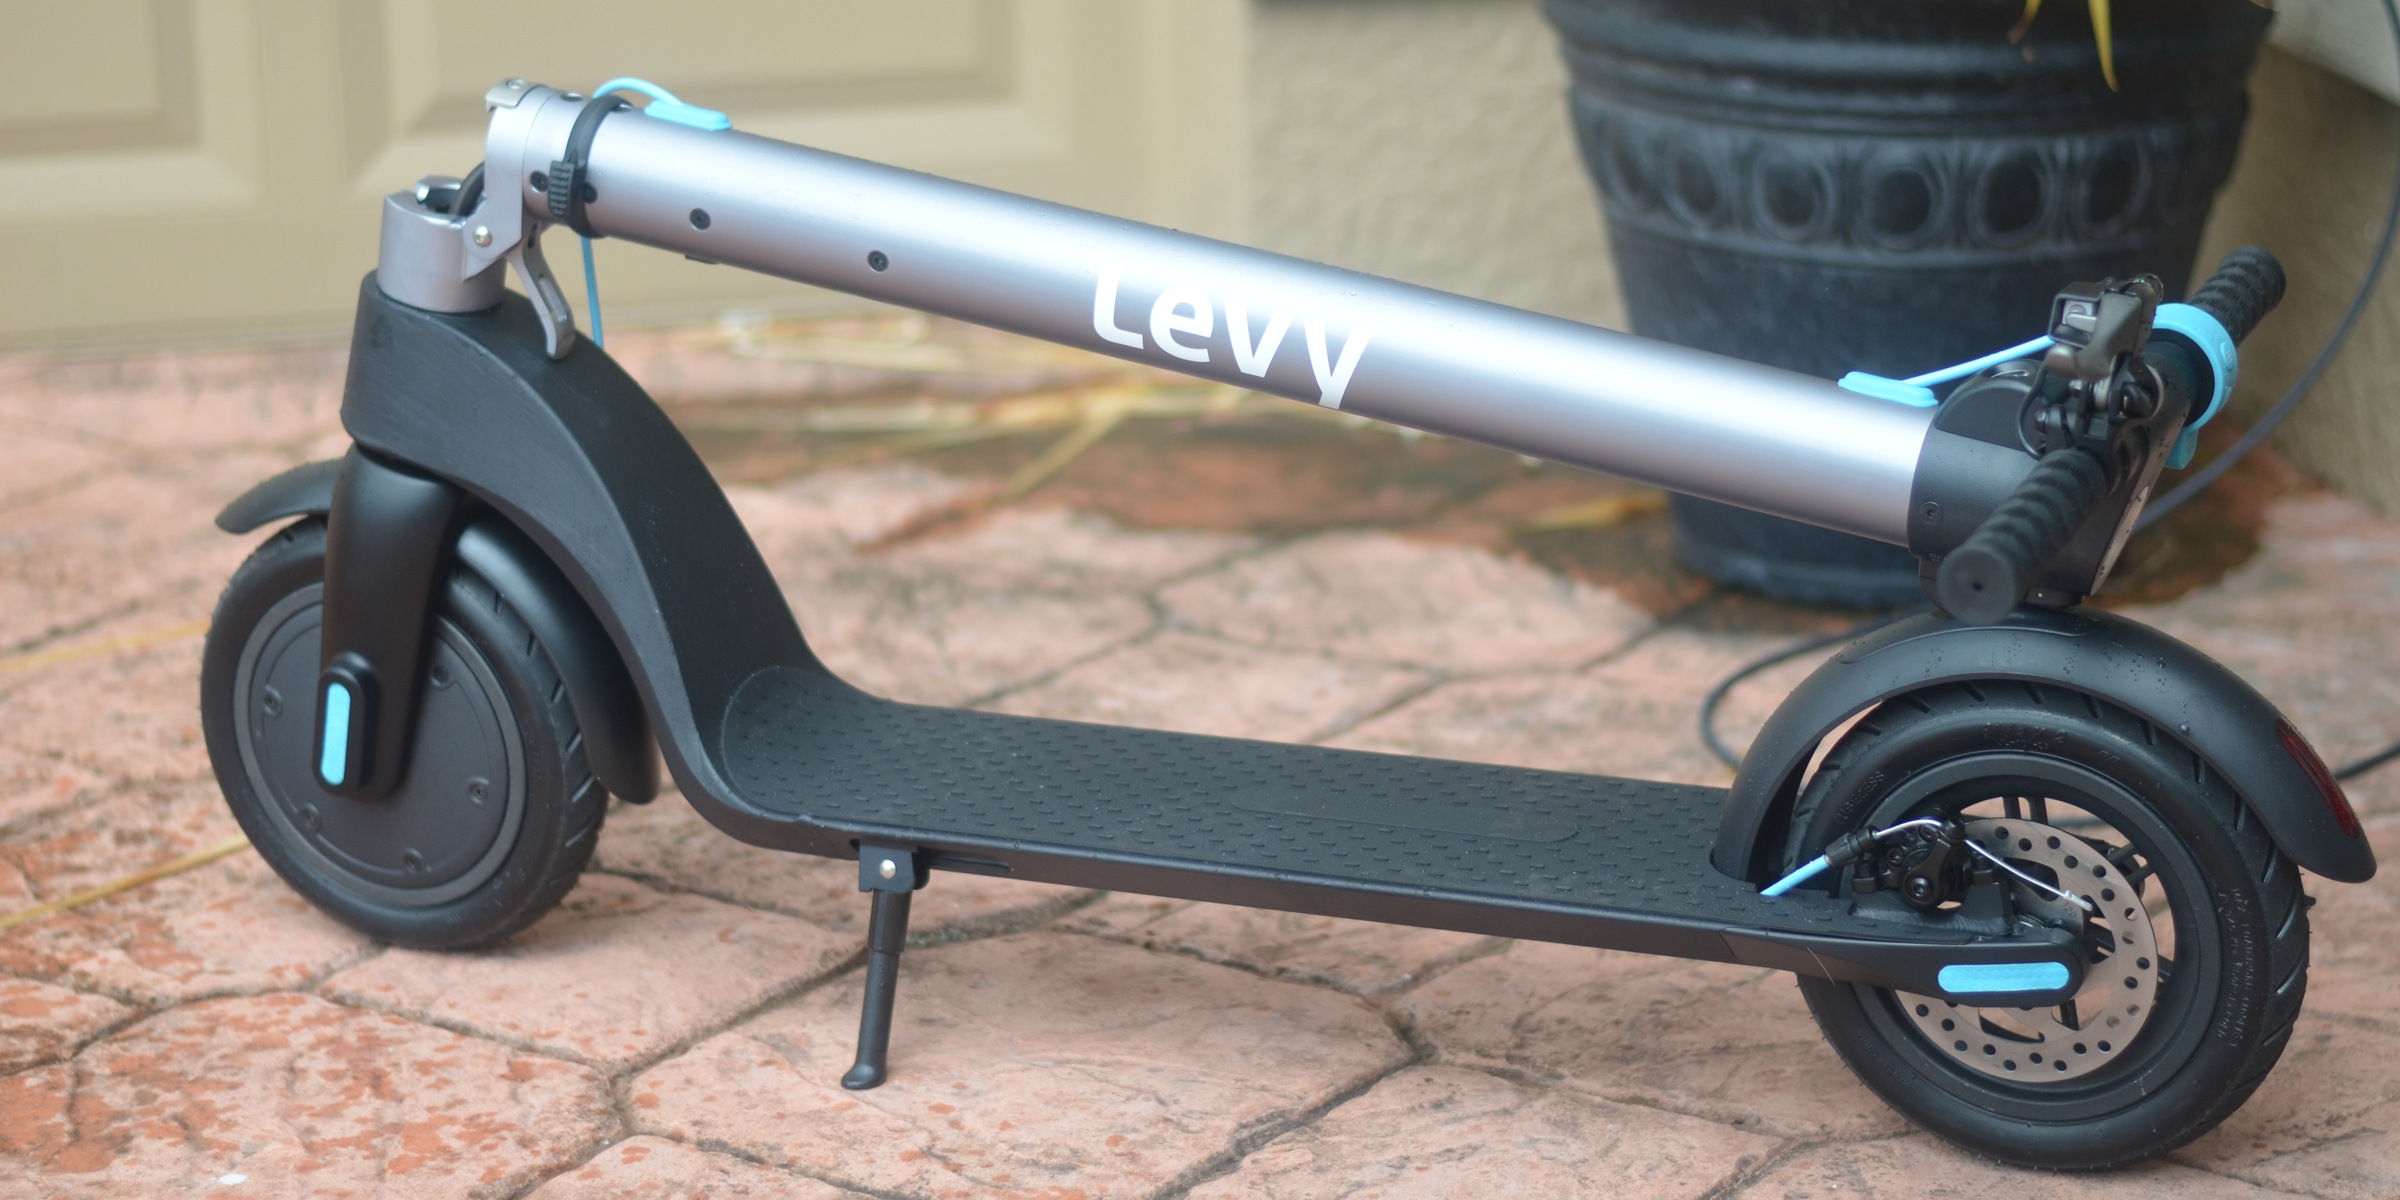 Levy electric scooter review: Sweet looking e-scooter with a removable battery